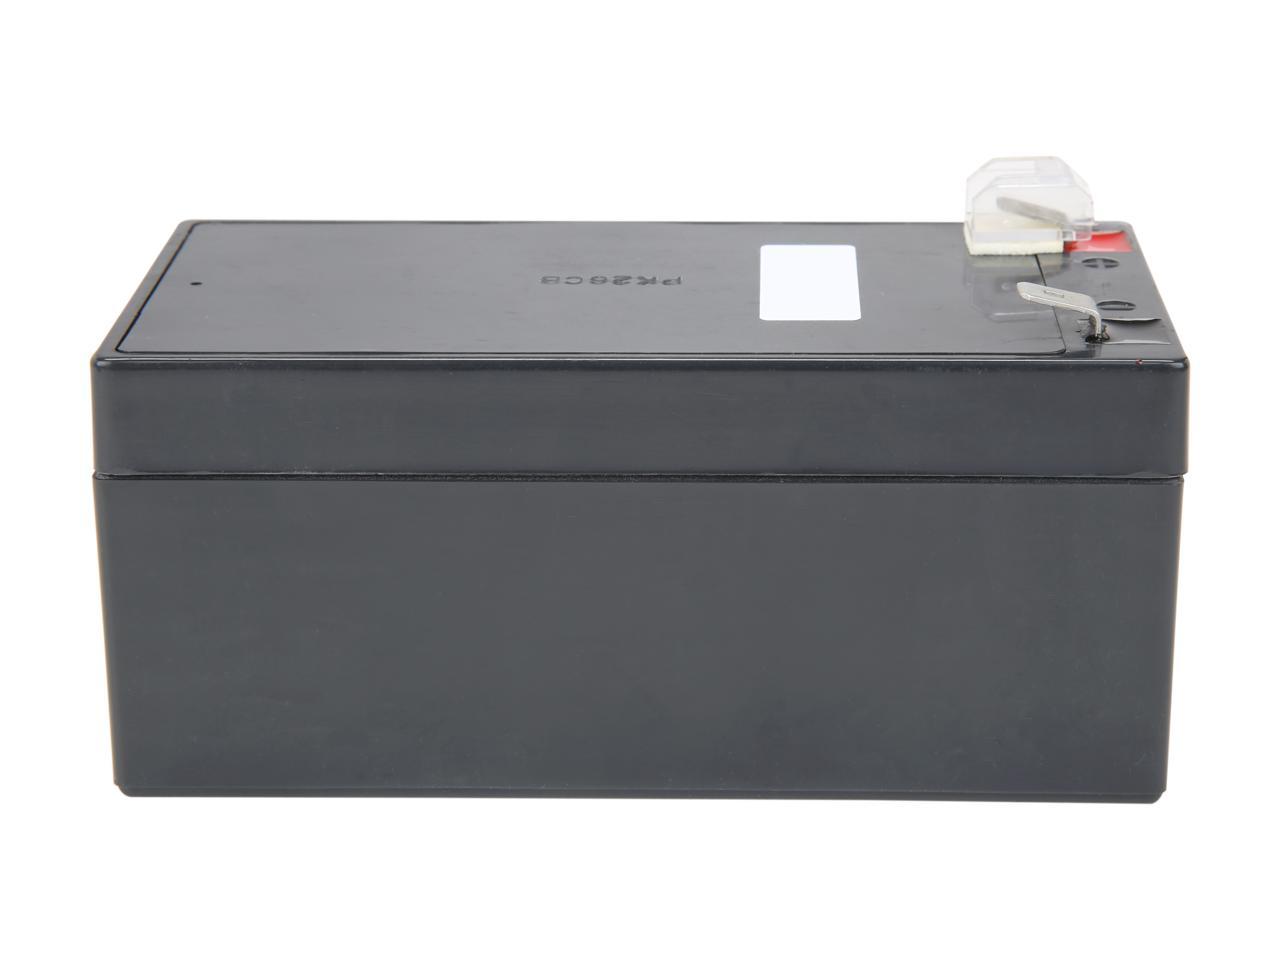 APC UPS Battery Replacement for APC Back-UPS models BE350G (RBC35)